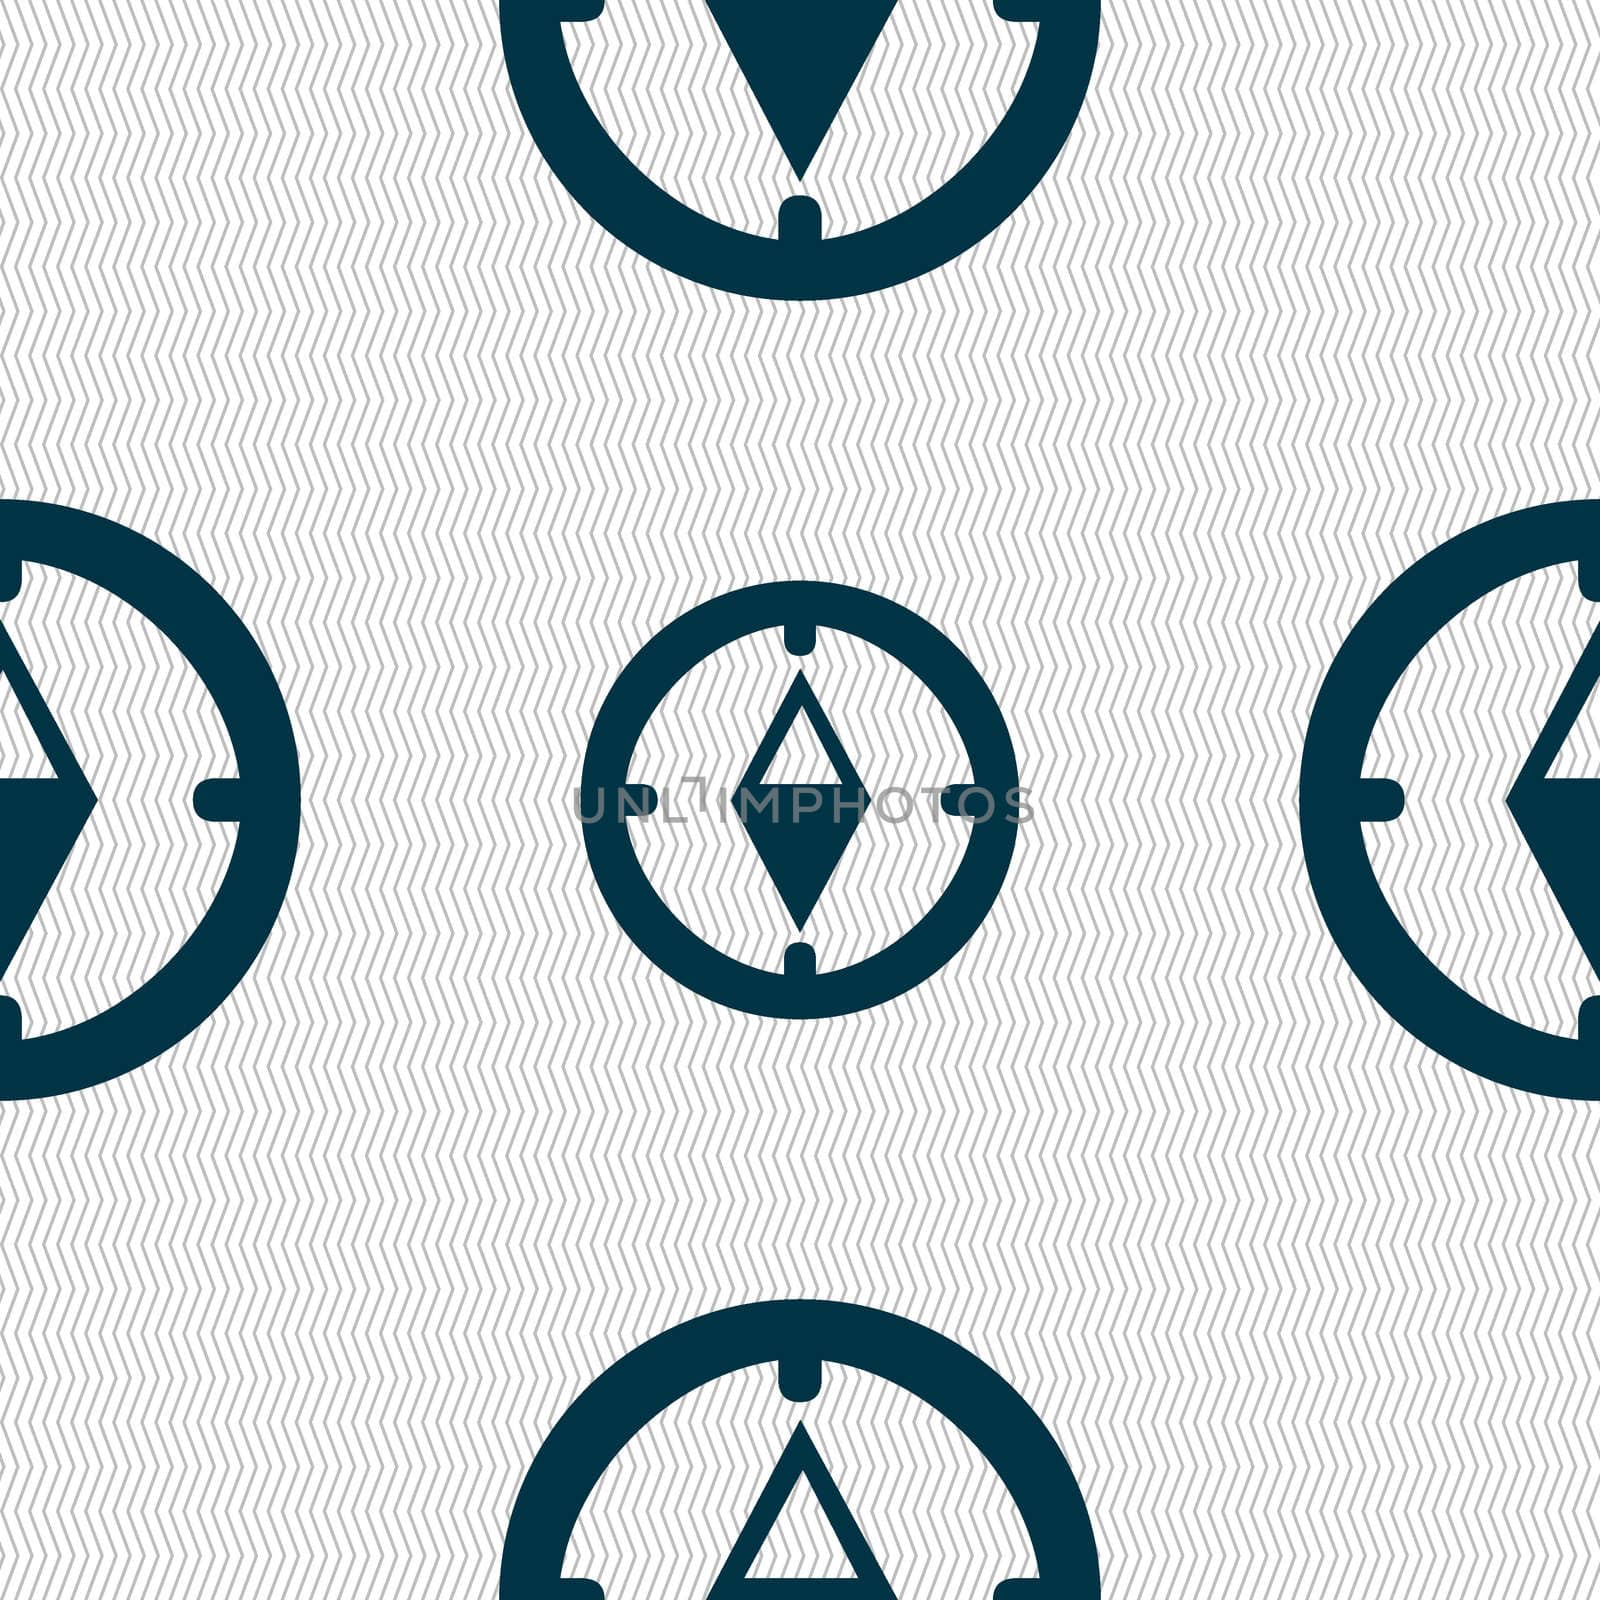 Compass sign icon. Windrose navigation symbol. Seamless abstract background with geometric shapes. illustration